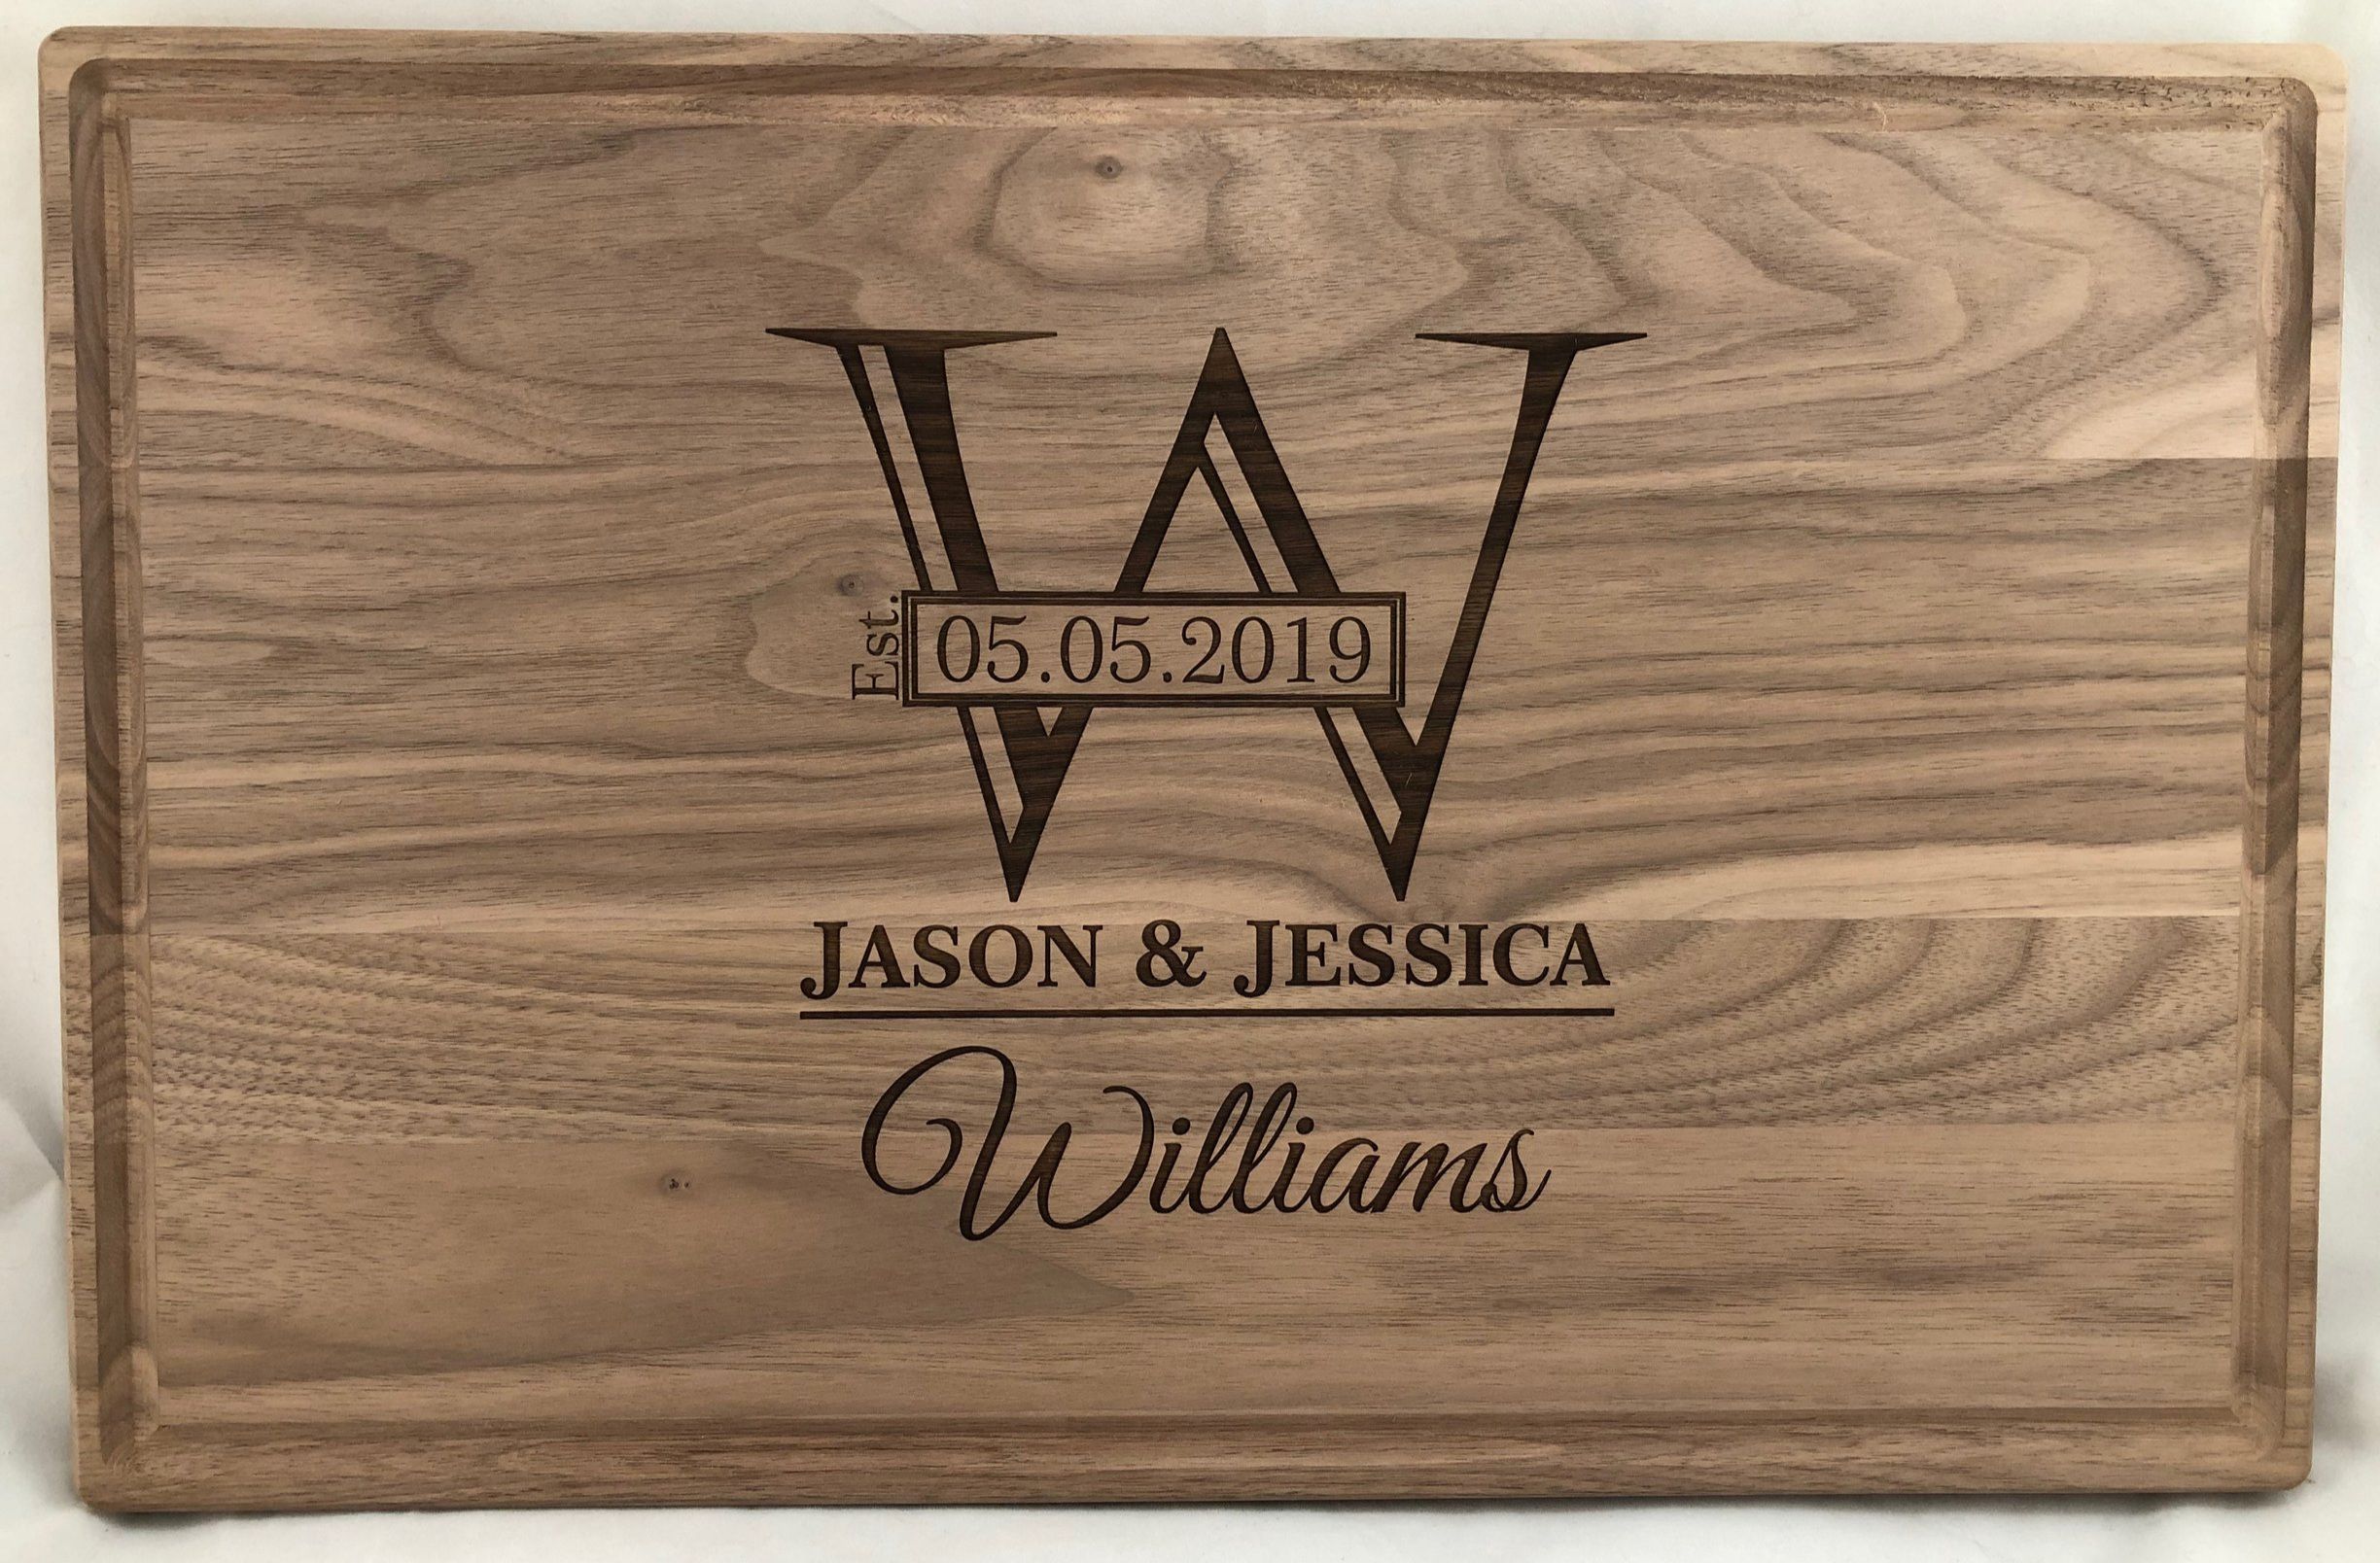 Laser engraved chopping board inspired by Home Alone